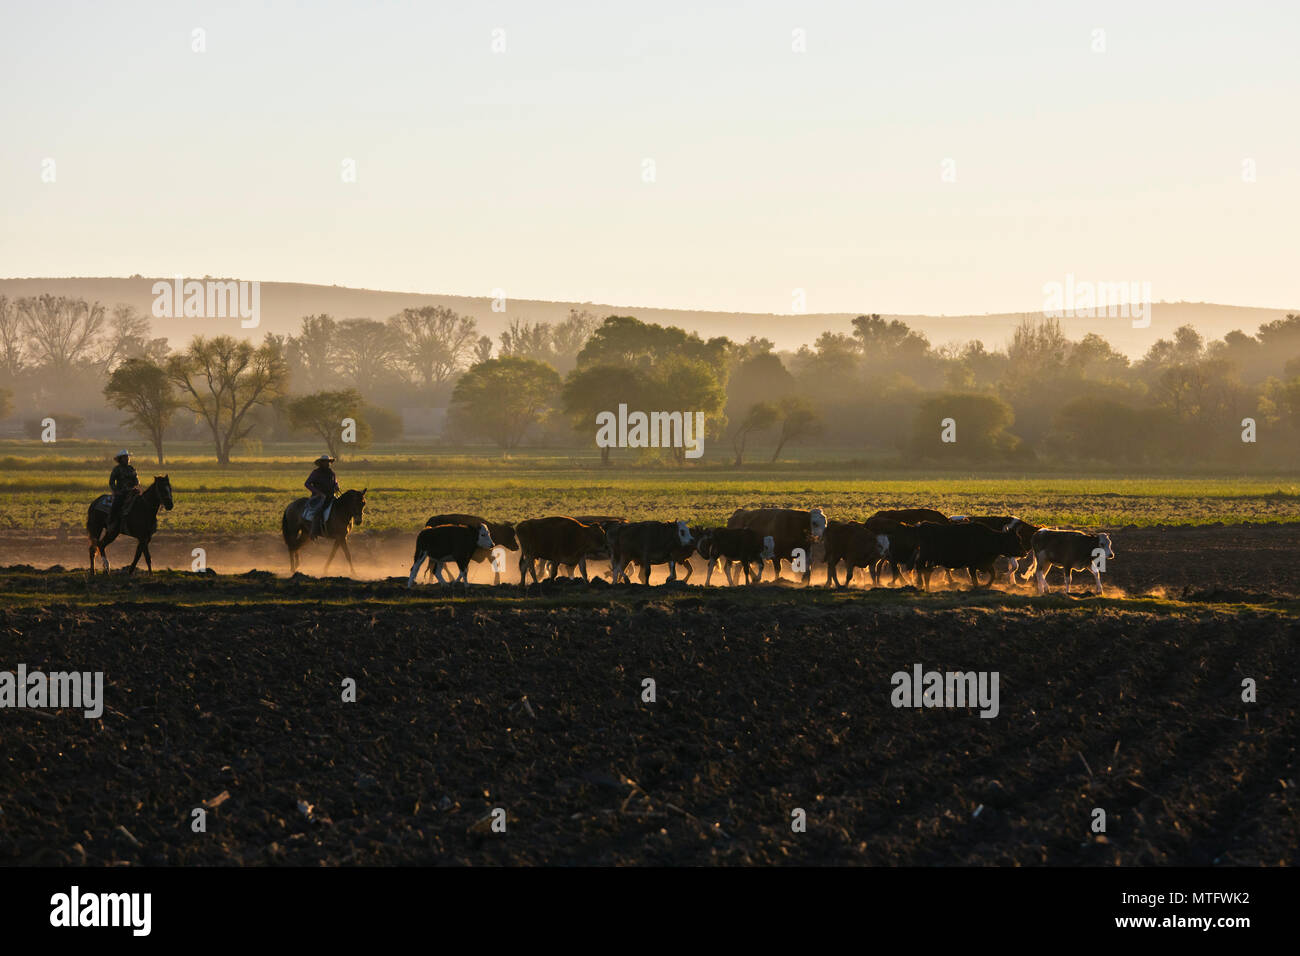 MEXICAN CABALLEROS herd cattle at day break - SAN MIGUEL DE ALLENDE, MEXICO Stock Photo